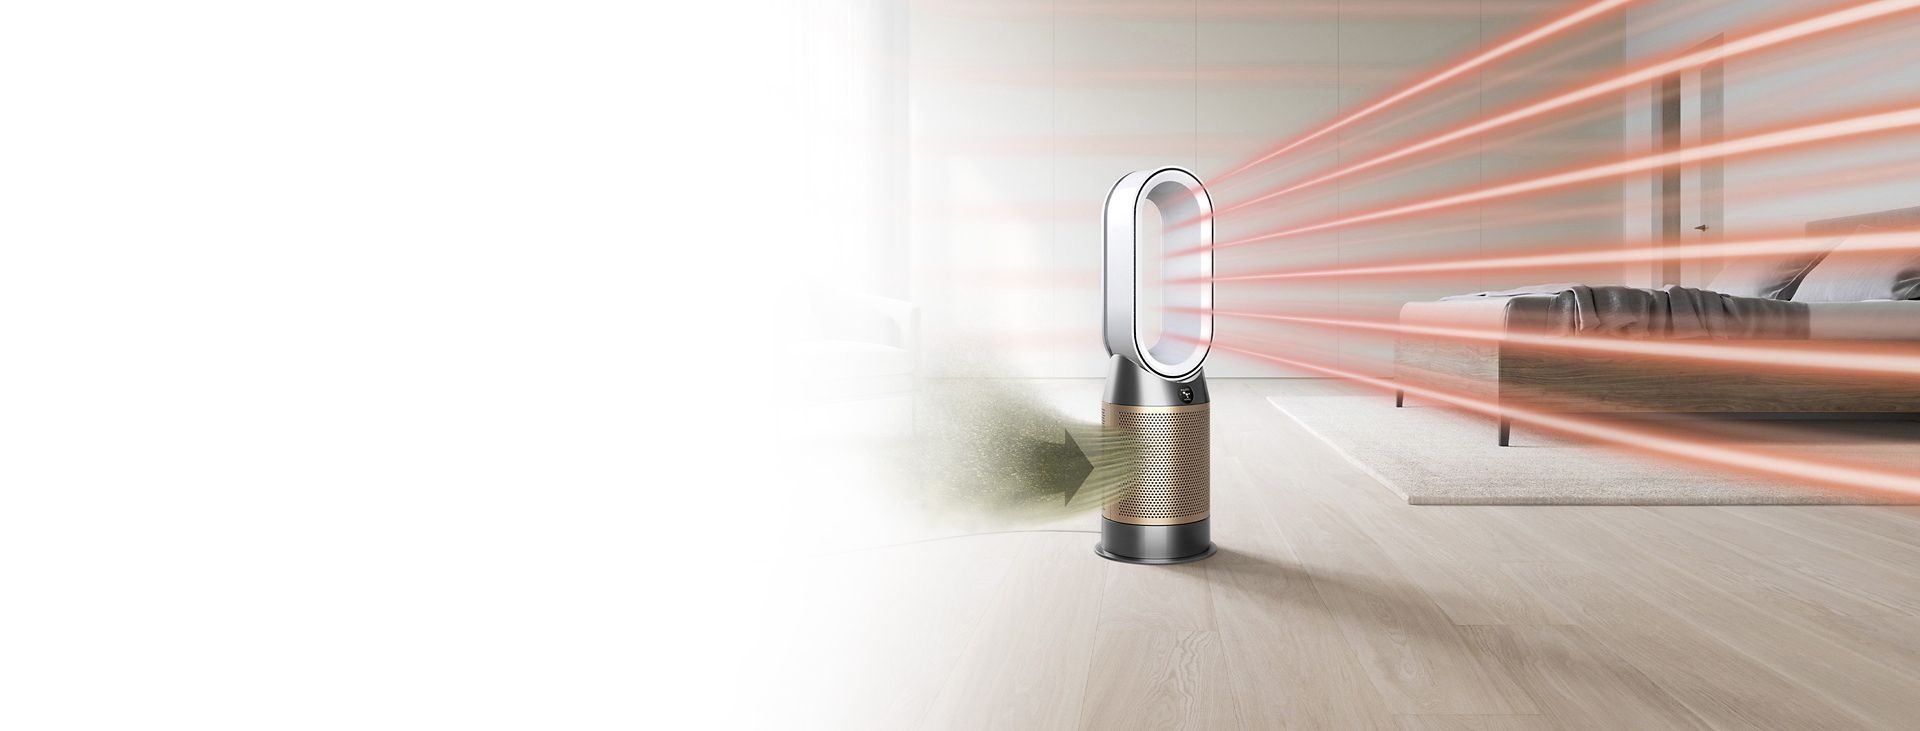 The Dyson Purifier Hot+Cool Formaldehyde purifying a living area.